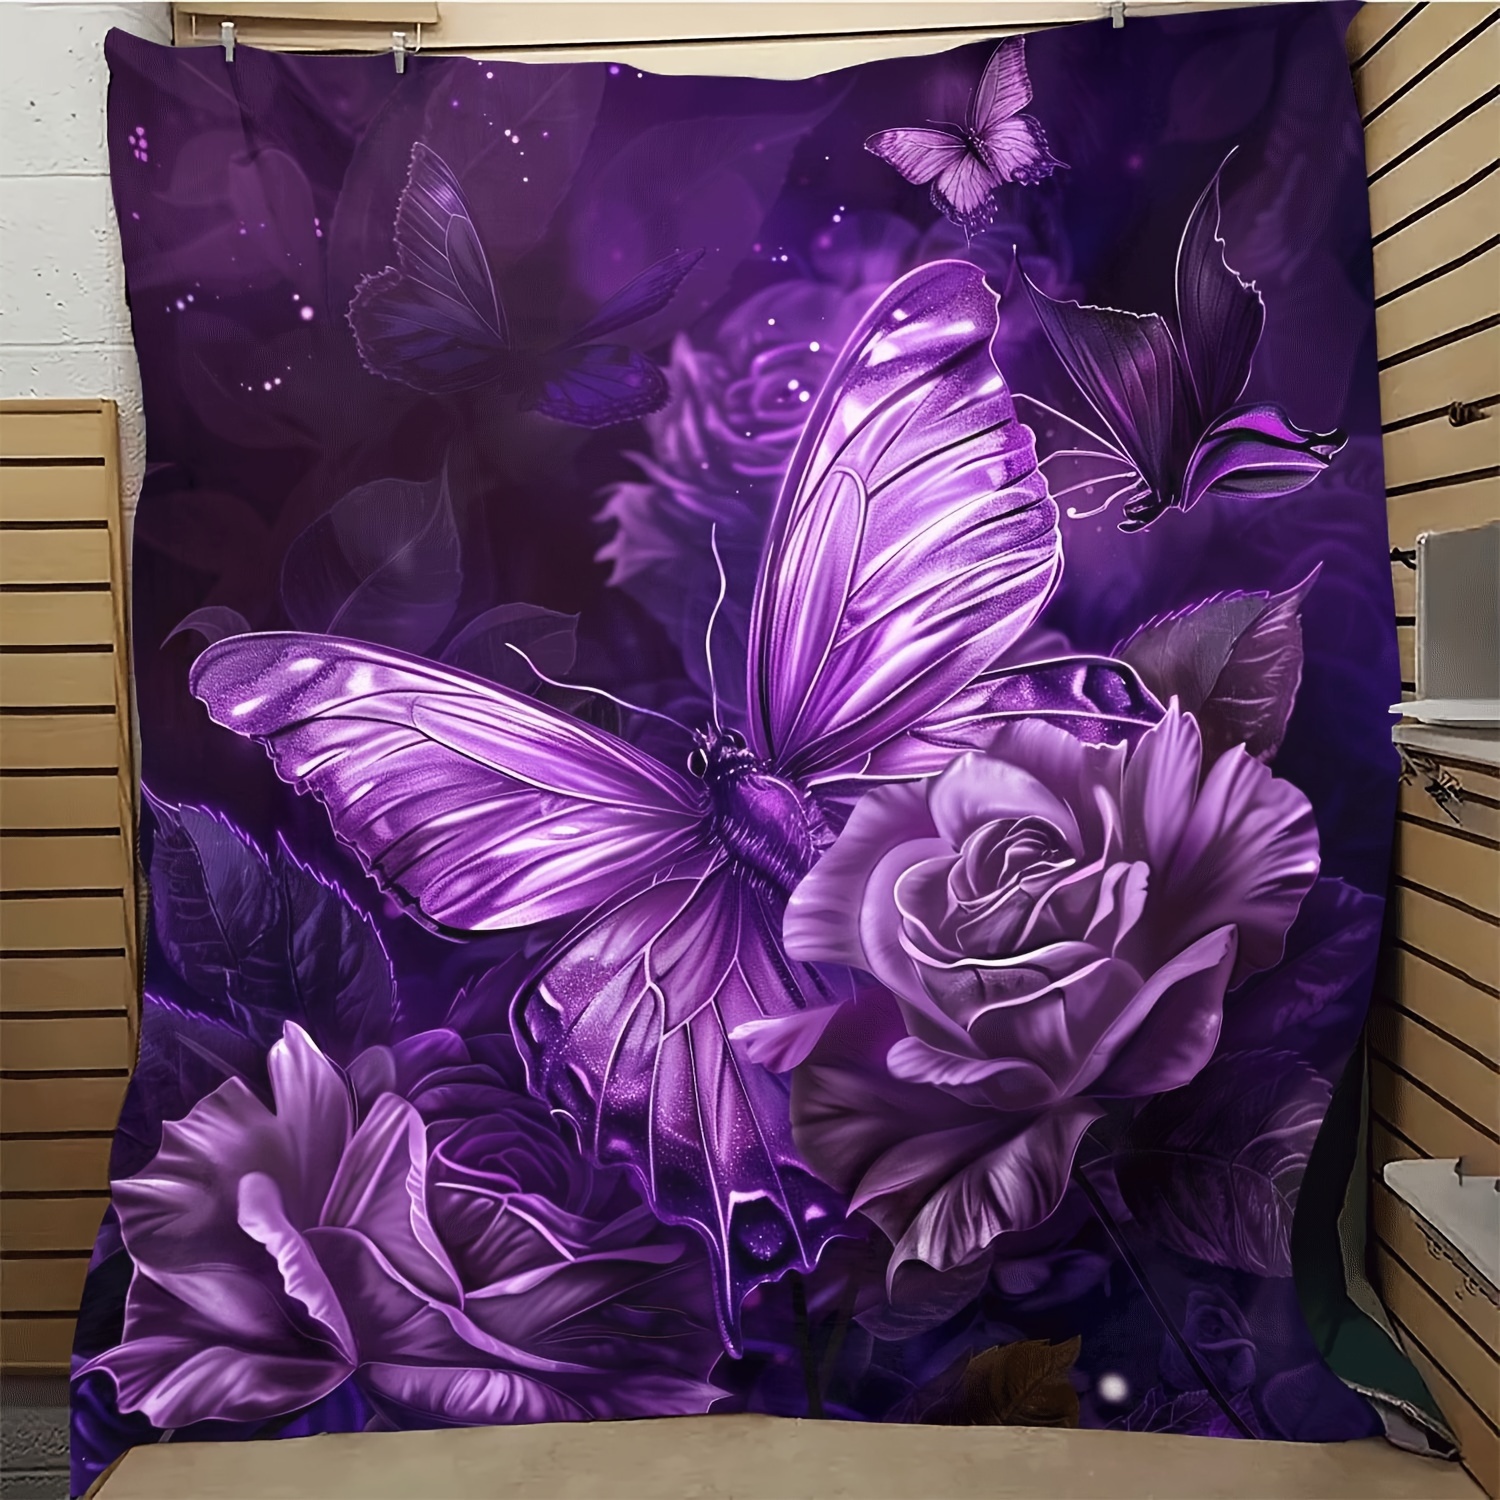 

1pc Flannel Purple Floral Butterfly Printed Blanket Shawl Blanket Soft Skin-friendly Casual Sofa Blanket, Throw Blanket, Nap Blanket, Multi-purpose Gift Blanket For Son